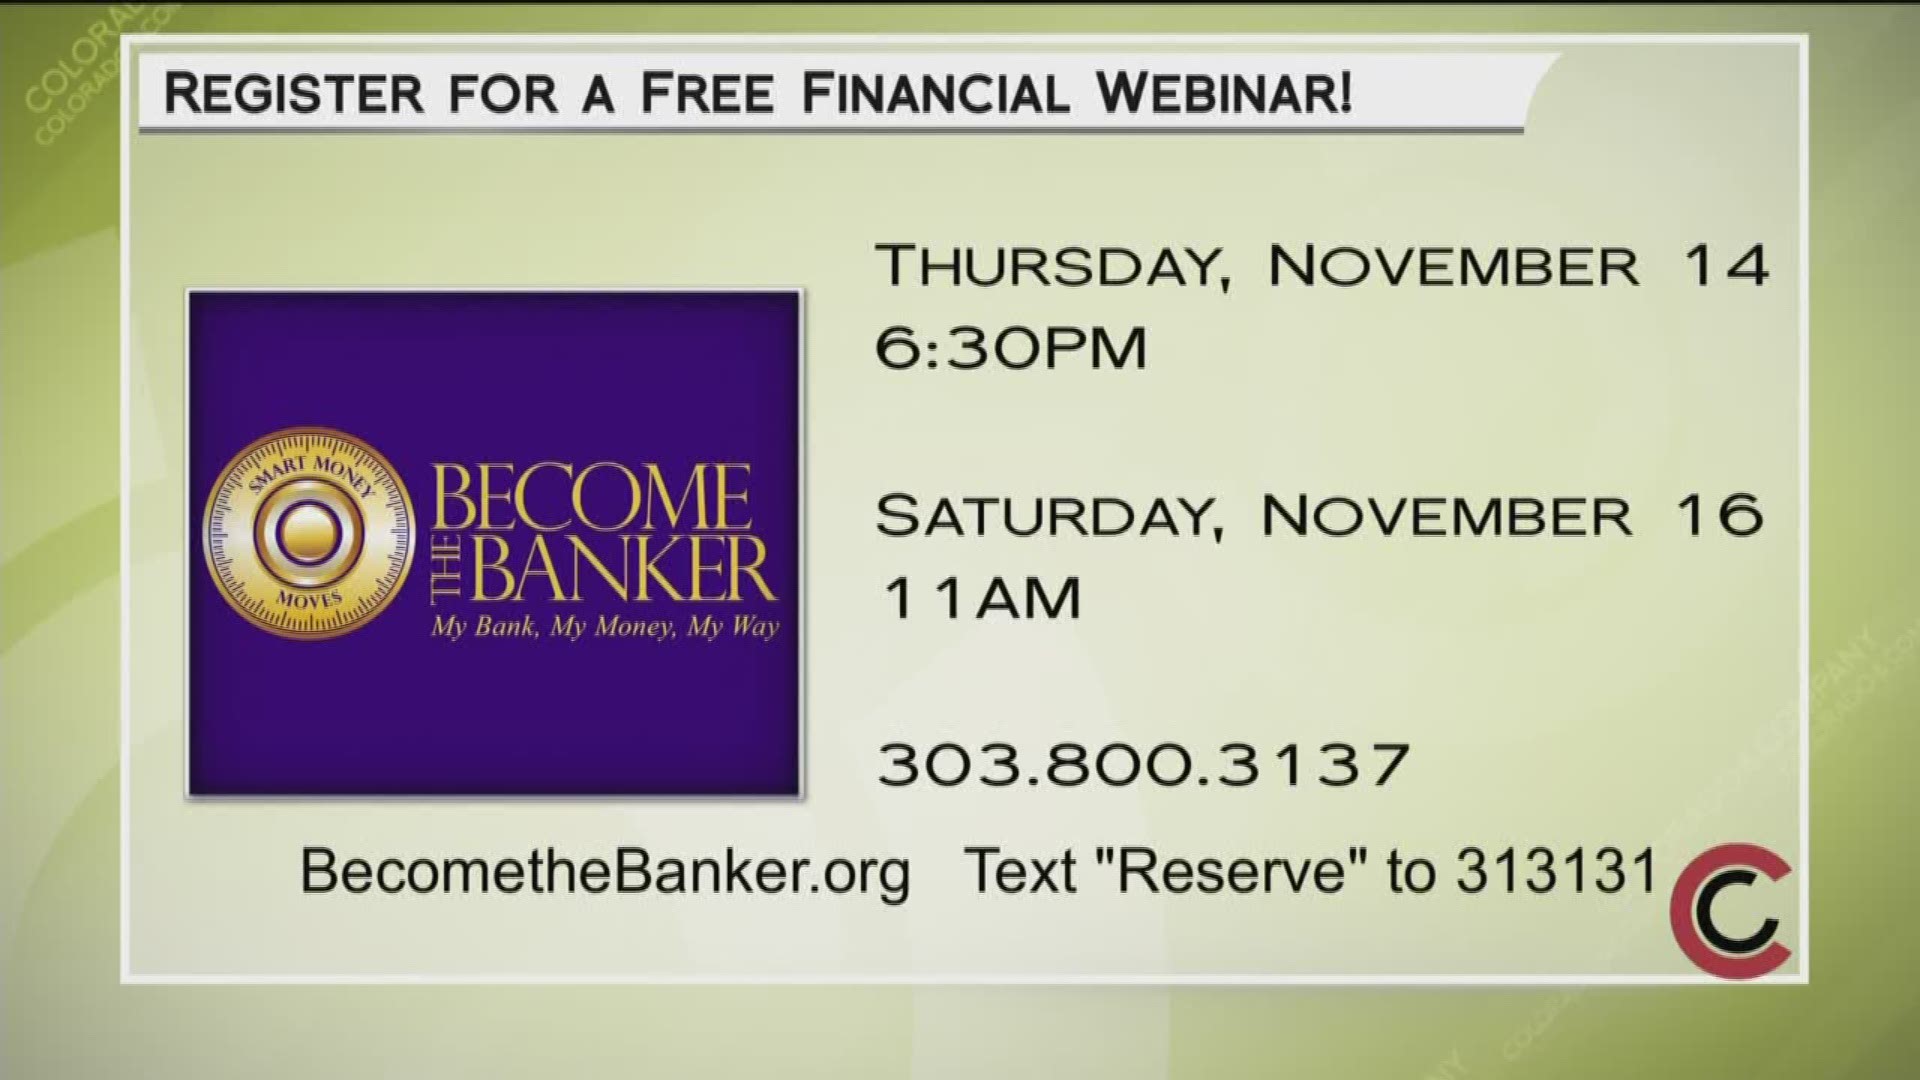 Secure your financial future by signing up for a free webinar at www.BecomeTheBanker.org, texting RESERVE to 313131, or by calling 303.800.3137.